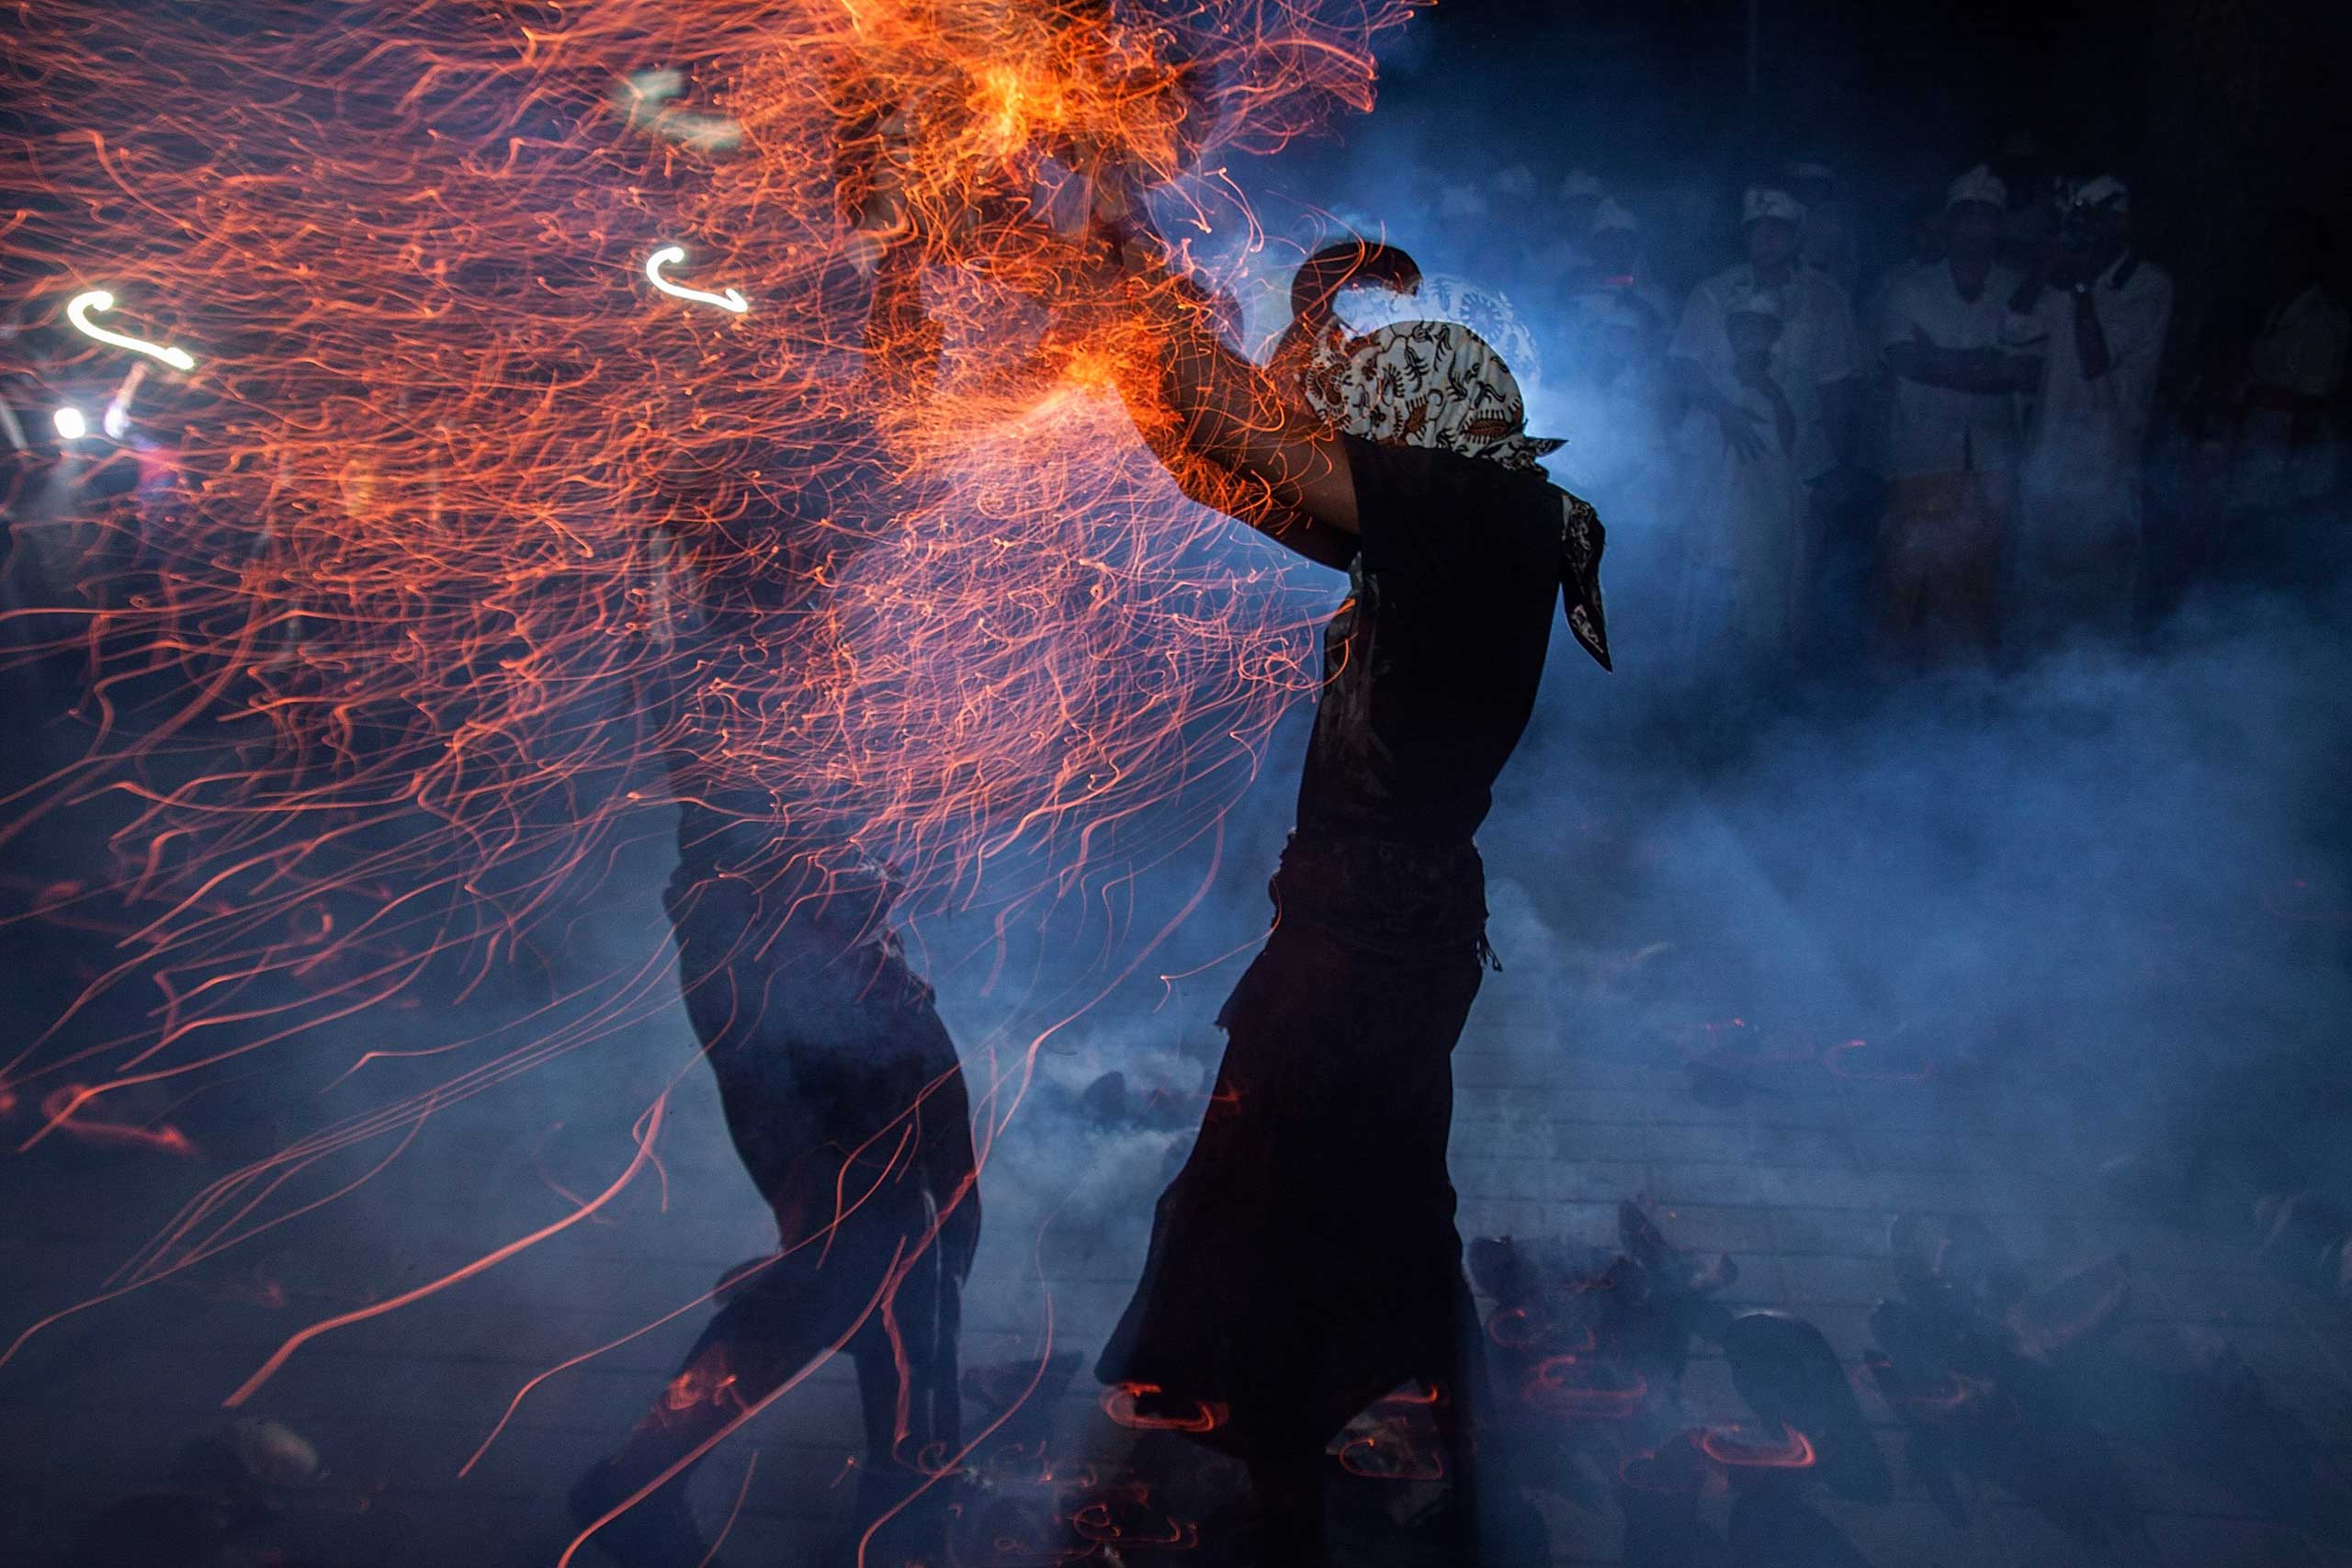 KUTA, BALI - OCTOBER 19: Participants fight during fire war ceremony at Dalem Temple on October 19, 2013 in Tuban, Kuta, Indonesia. The annual ceremony, known locally as Siat Geni, is held to ward off bad luck and bring courage. (Photo by Putu Sayoga/Getty Images)